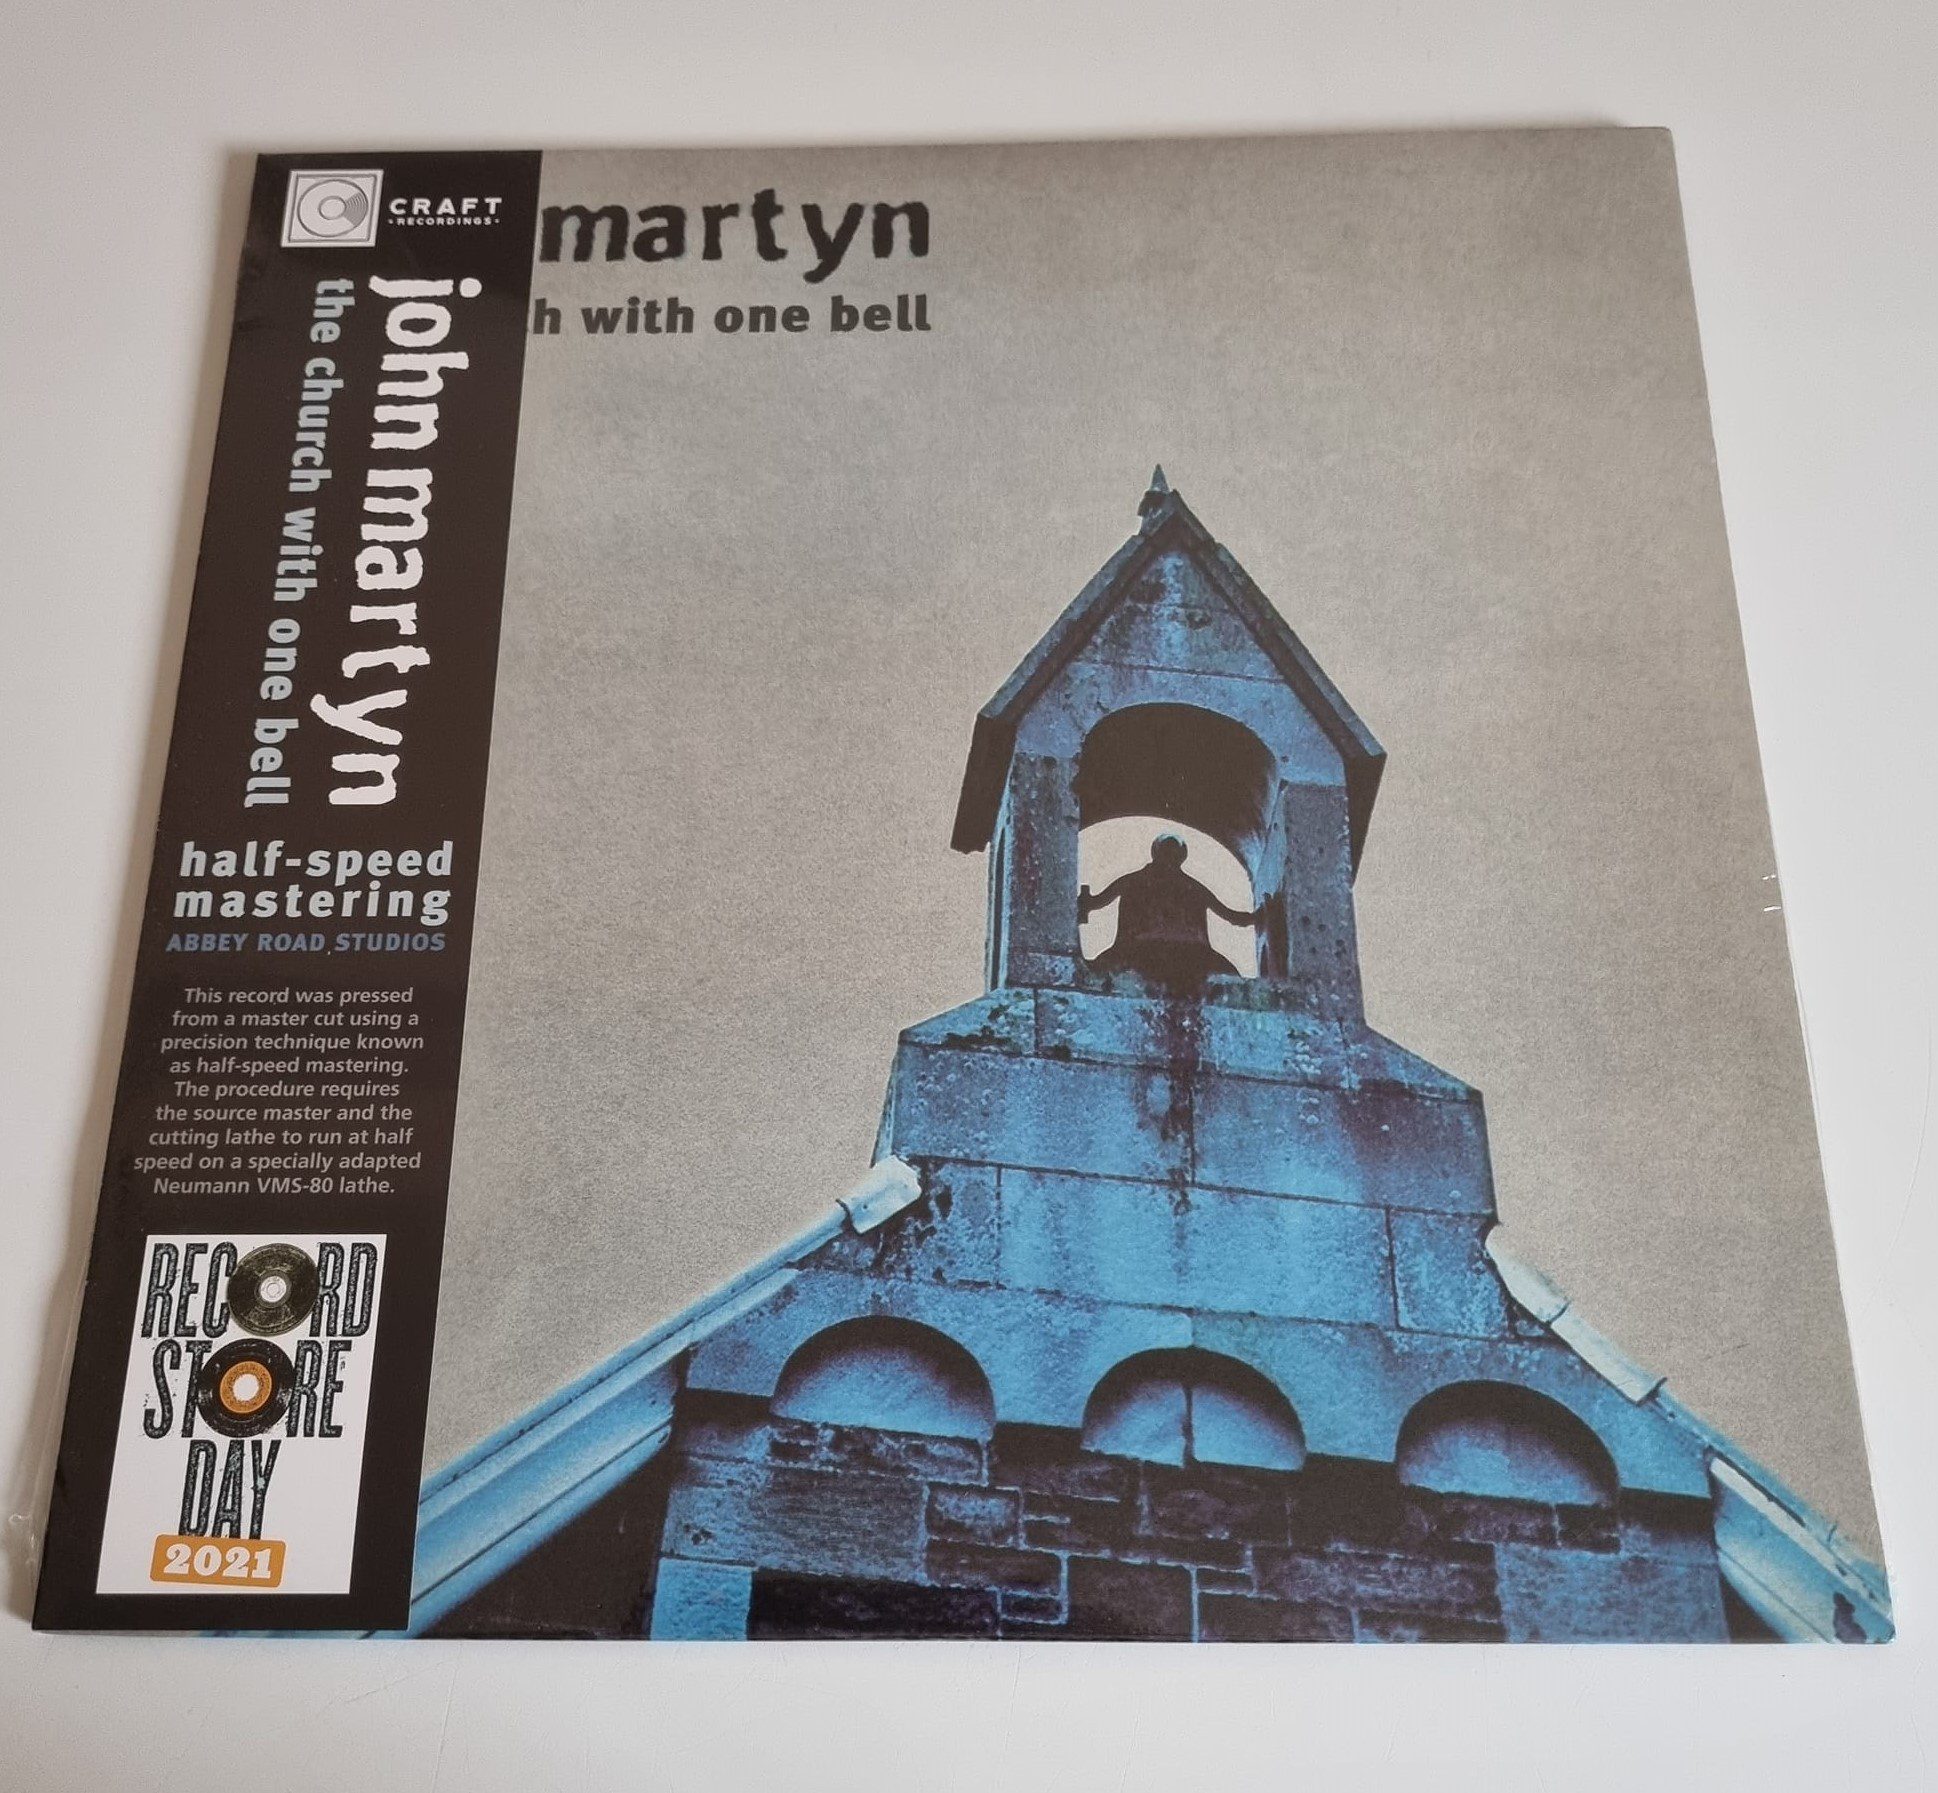 Buy this rare John Martyn record by clicking here